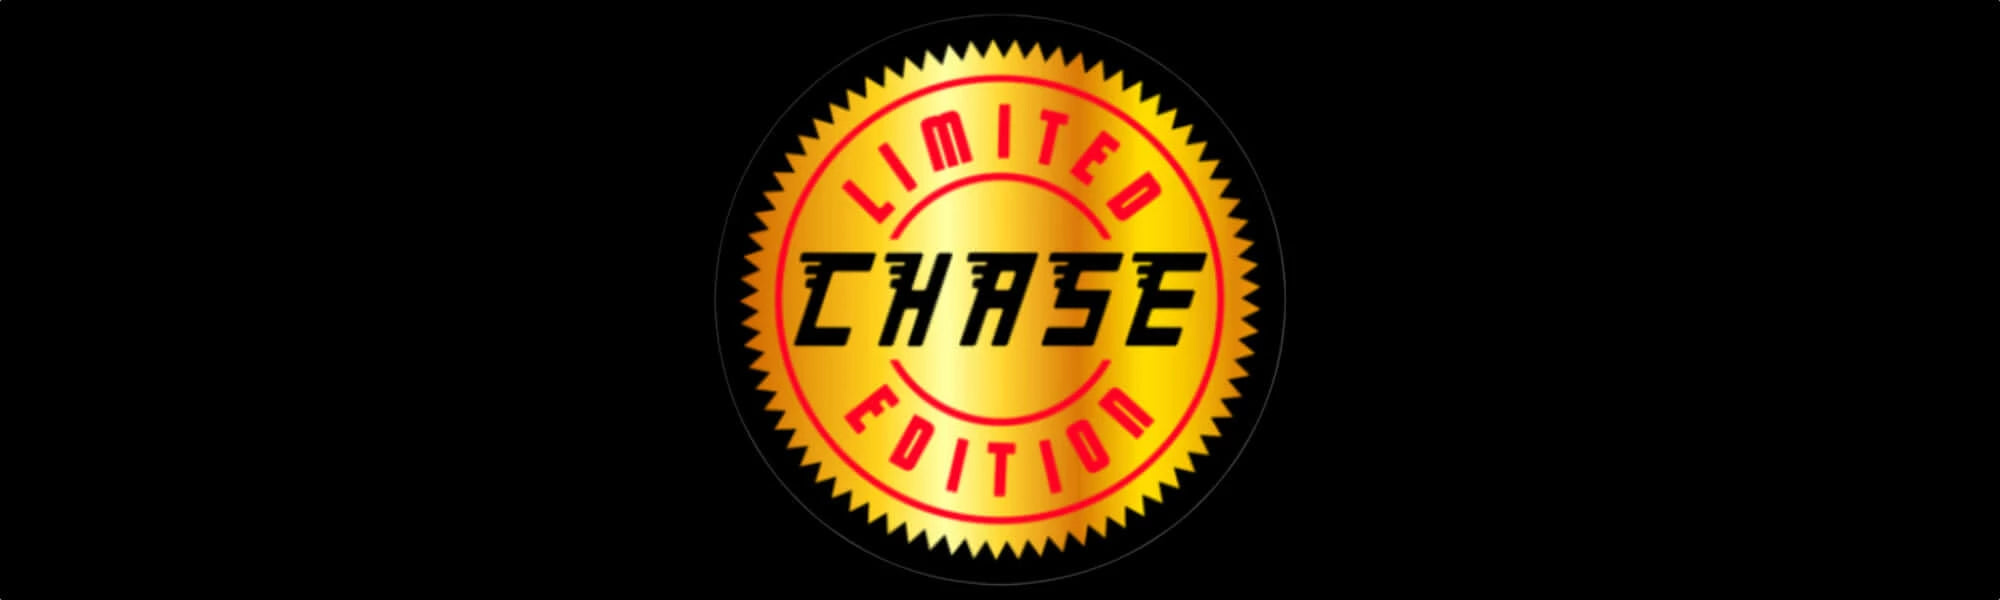 Chases